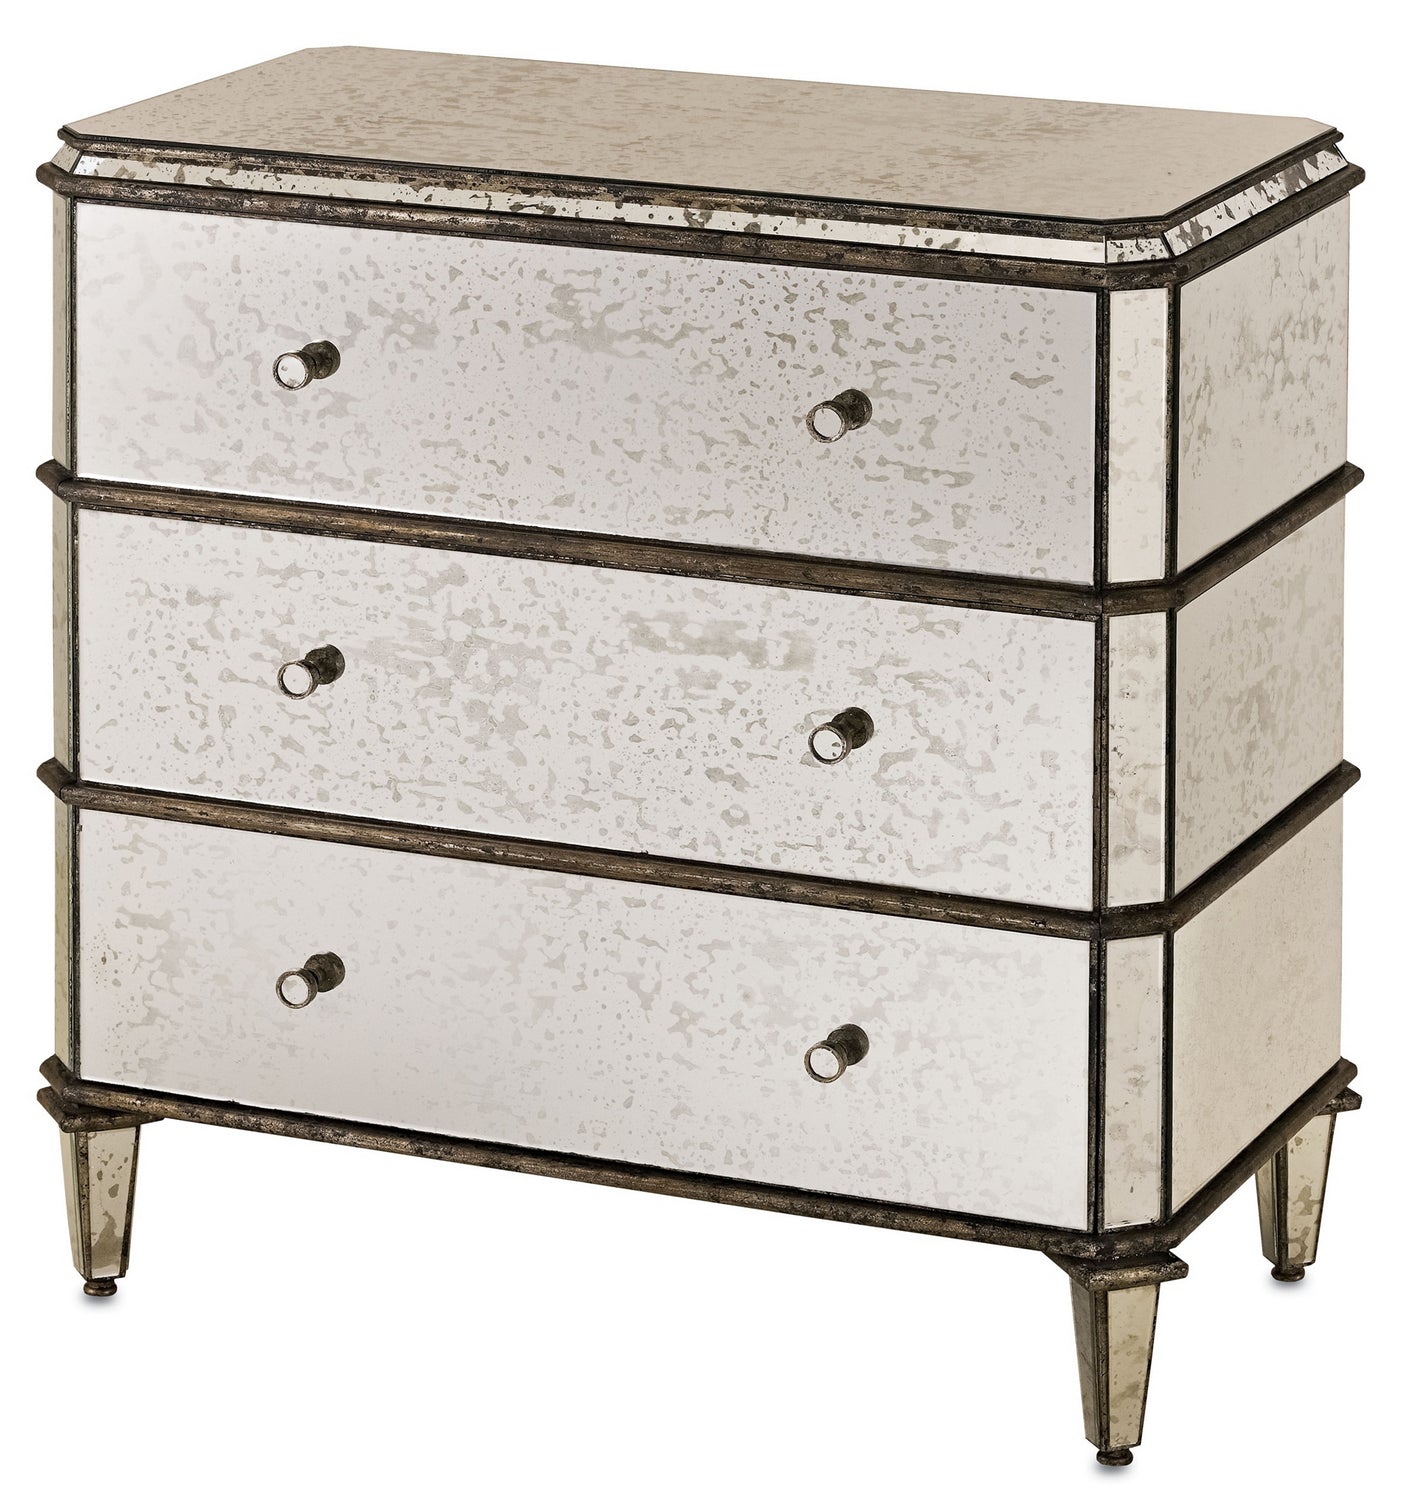 Chest from the Antiqued collection in Antique Mirror finish